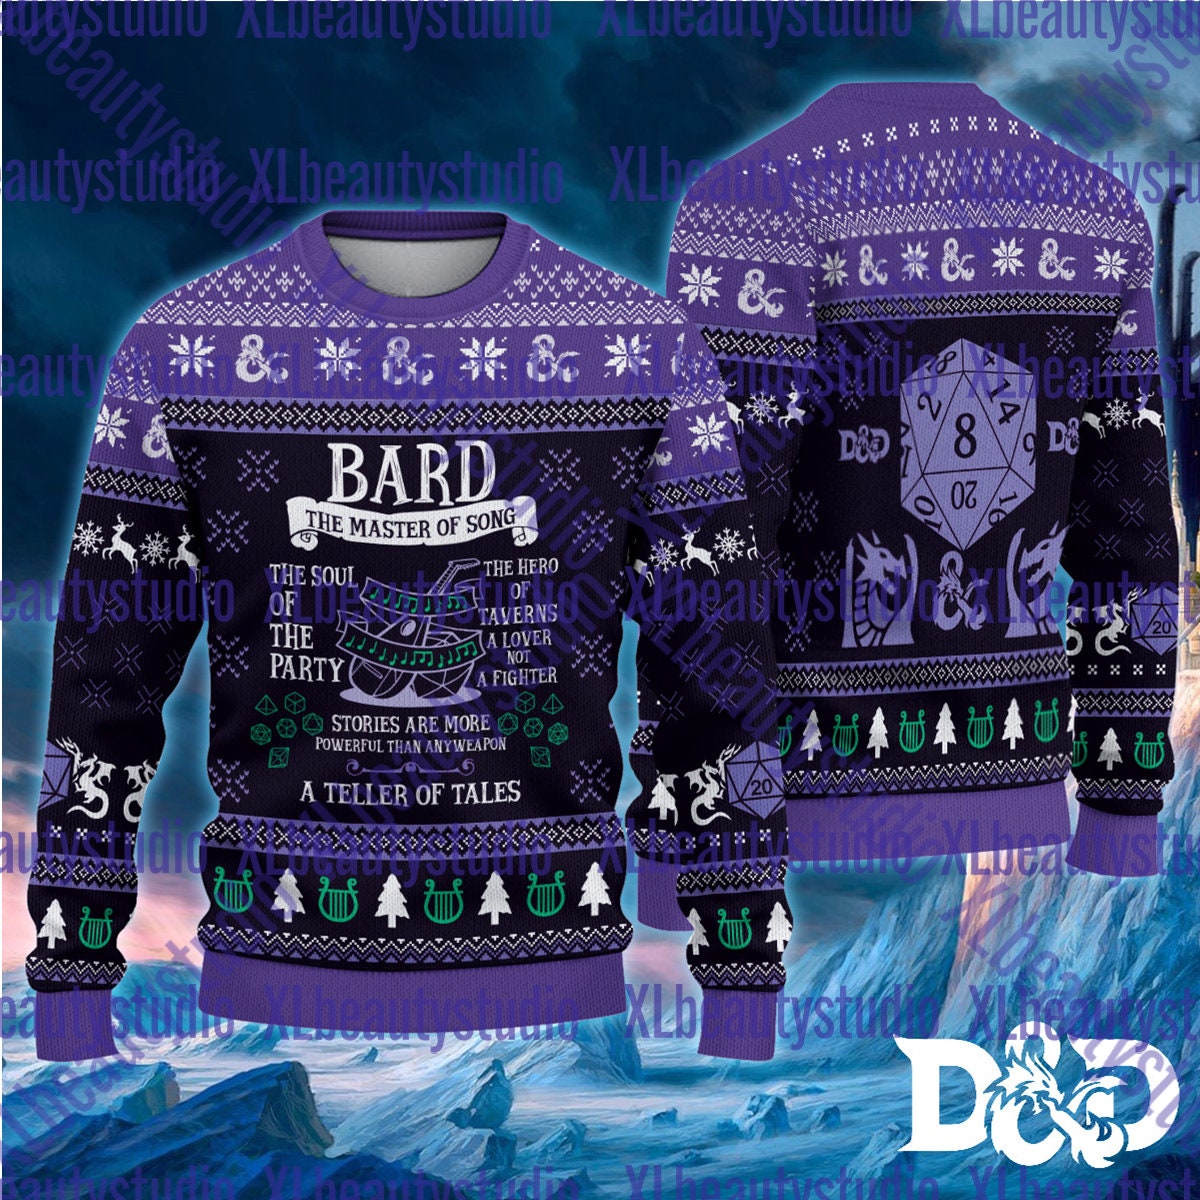 Beholder Monster Dungeons & Dragons Ugly Christmas Sweater - Tagotee